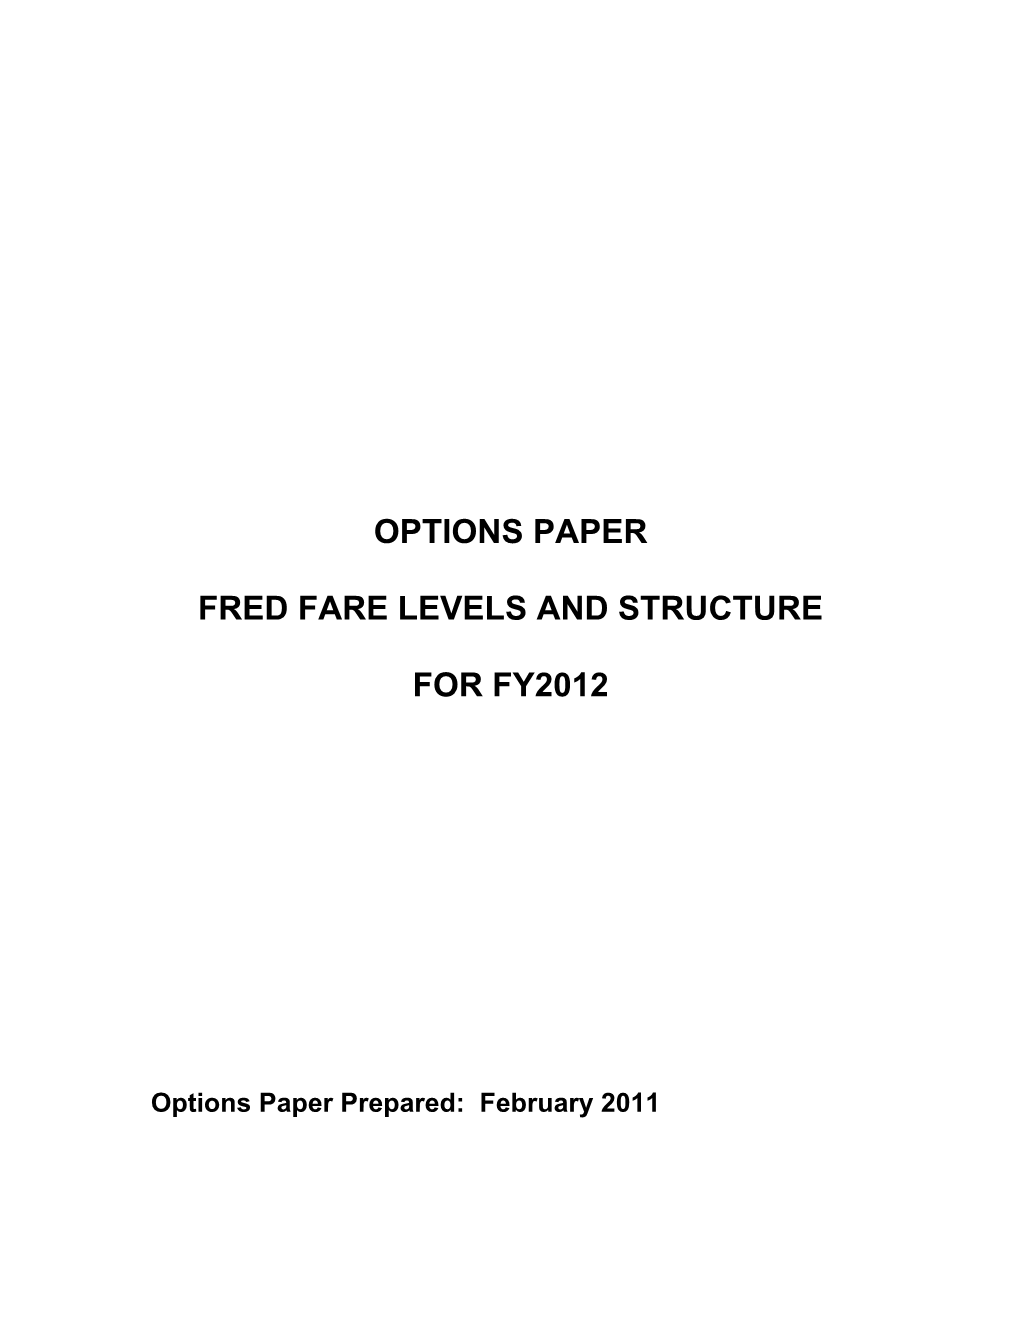 Fred Fare Levels and Structure